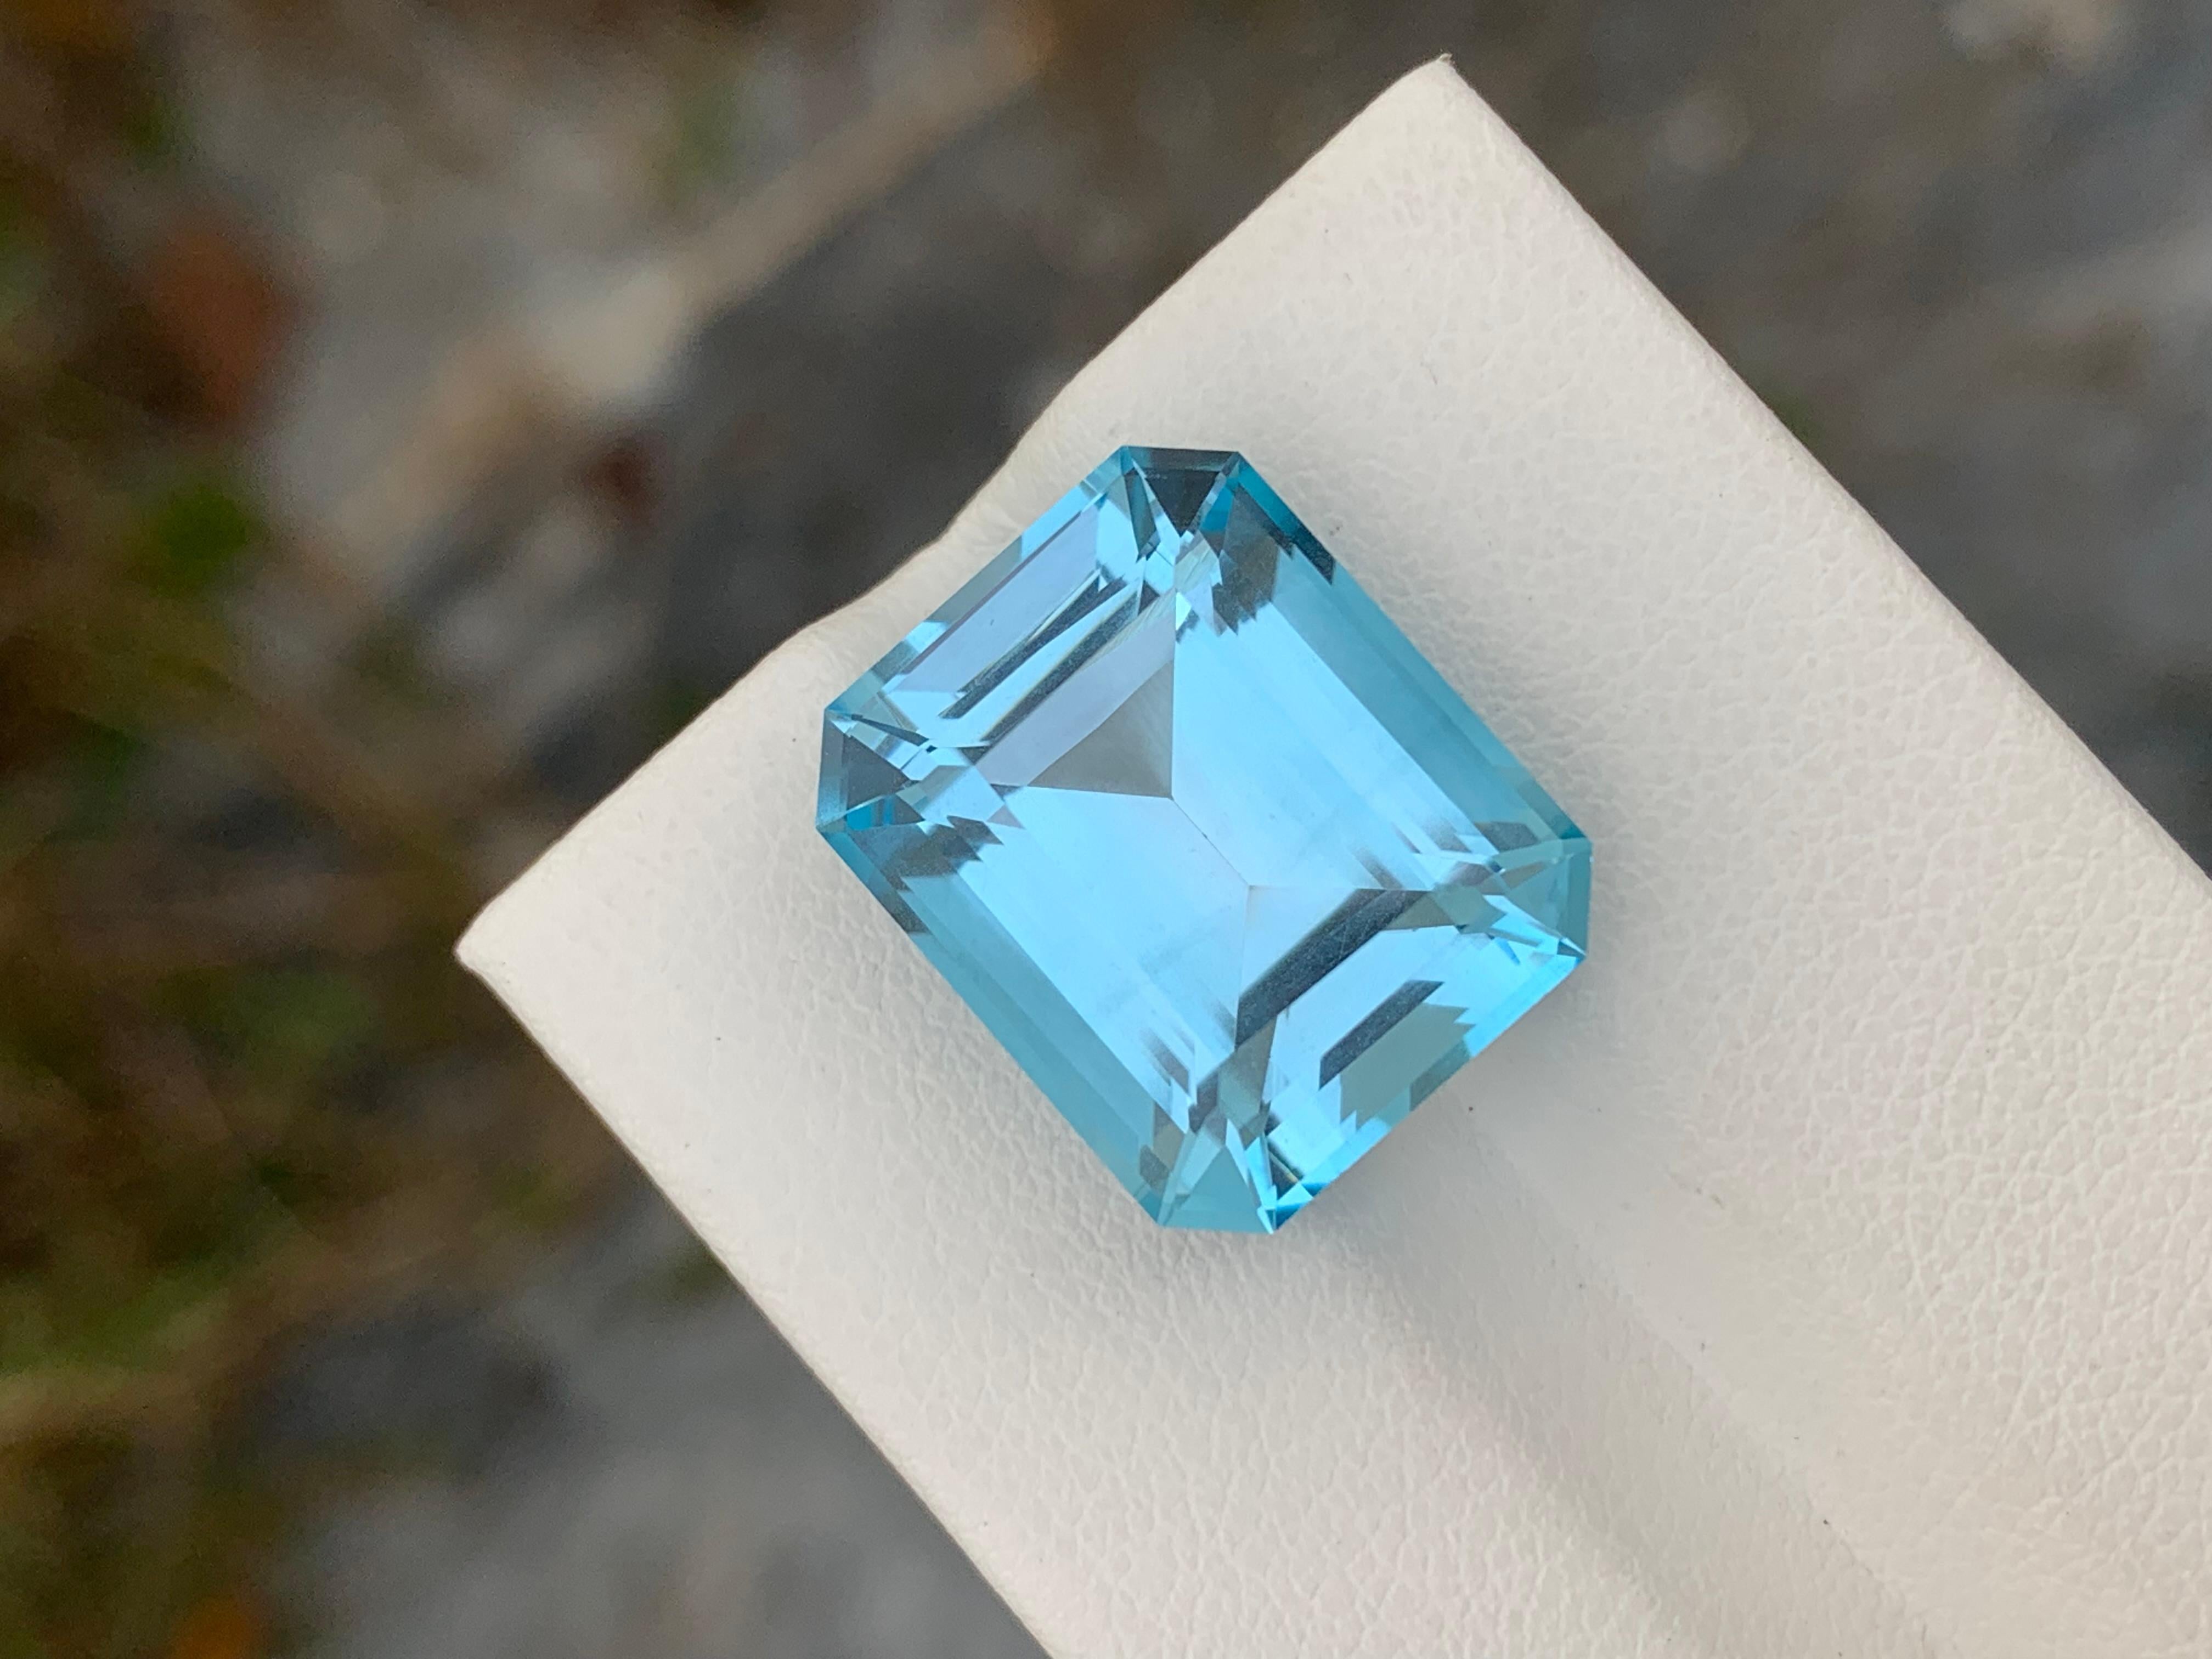 Loose Sky Blue Topaz
Weight: 18.80 Carats
Dimension: 16.8 x 13.8 x 9.5 Mm
Origin: Brazil
Colour: Sky Blue
Certificate: On Demand
Shape: Emerald 

Blue topaz is a stunning gemstone prized for its vibrant blue color and remarkable clarity. It belongs